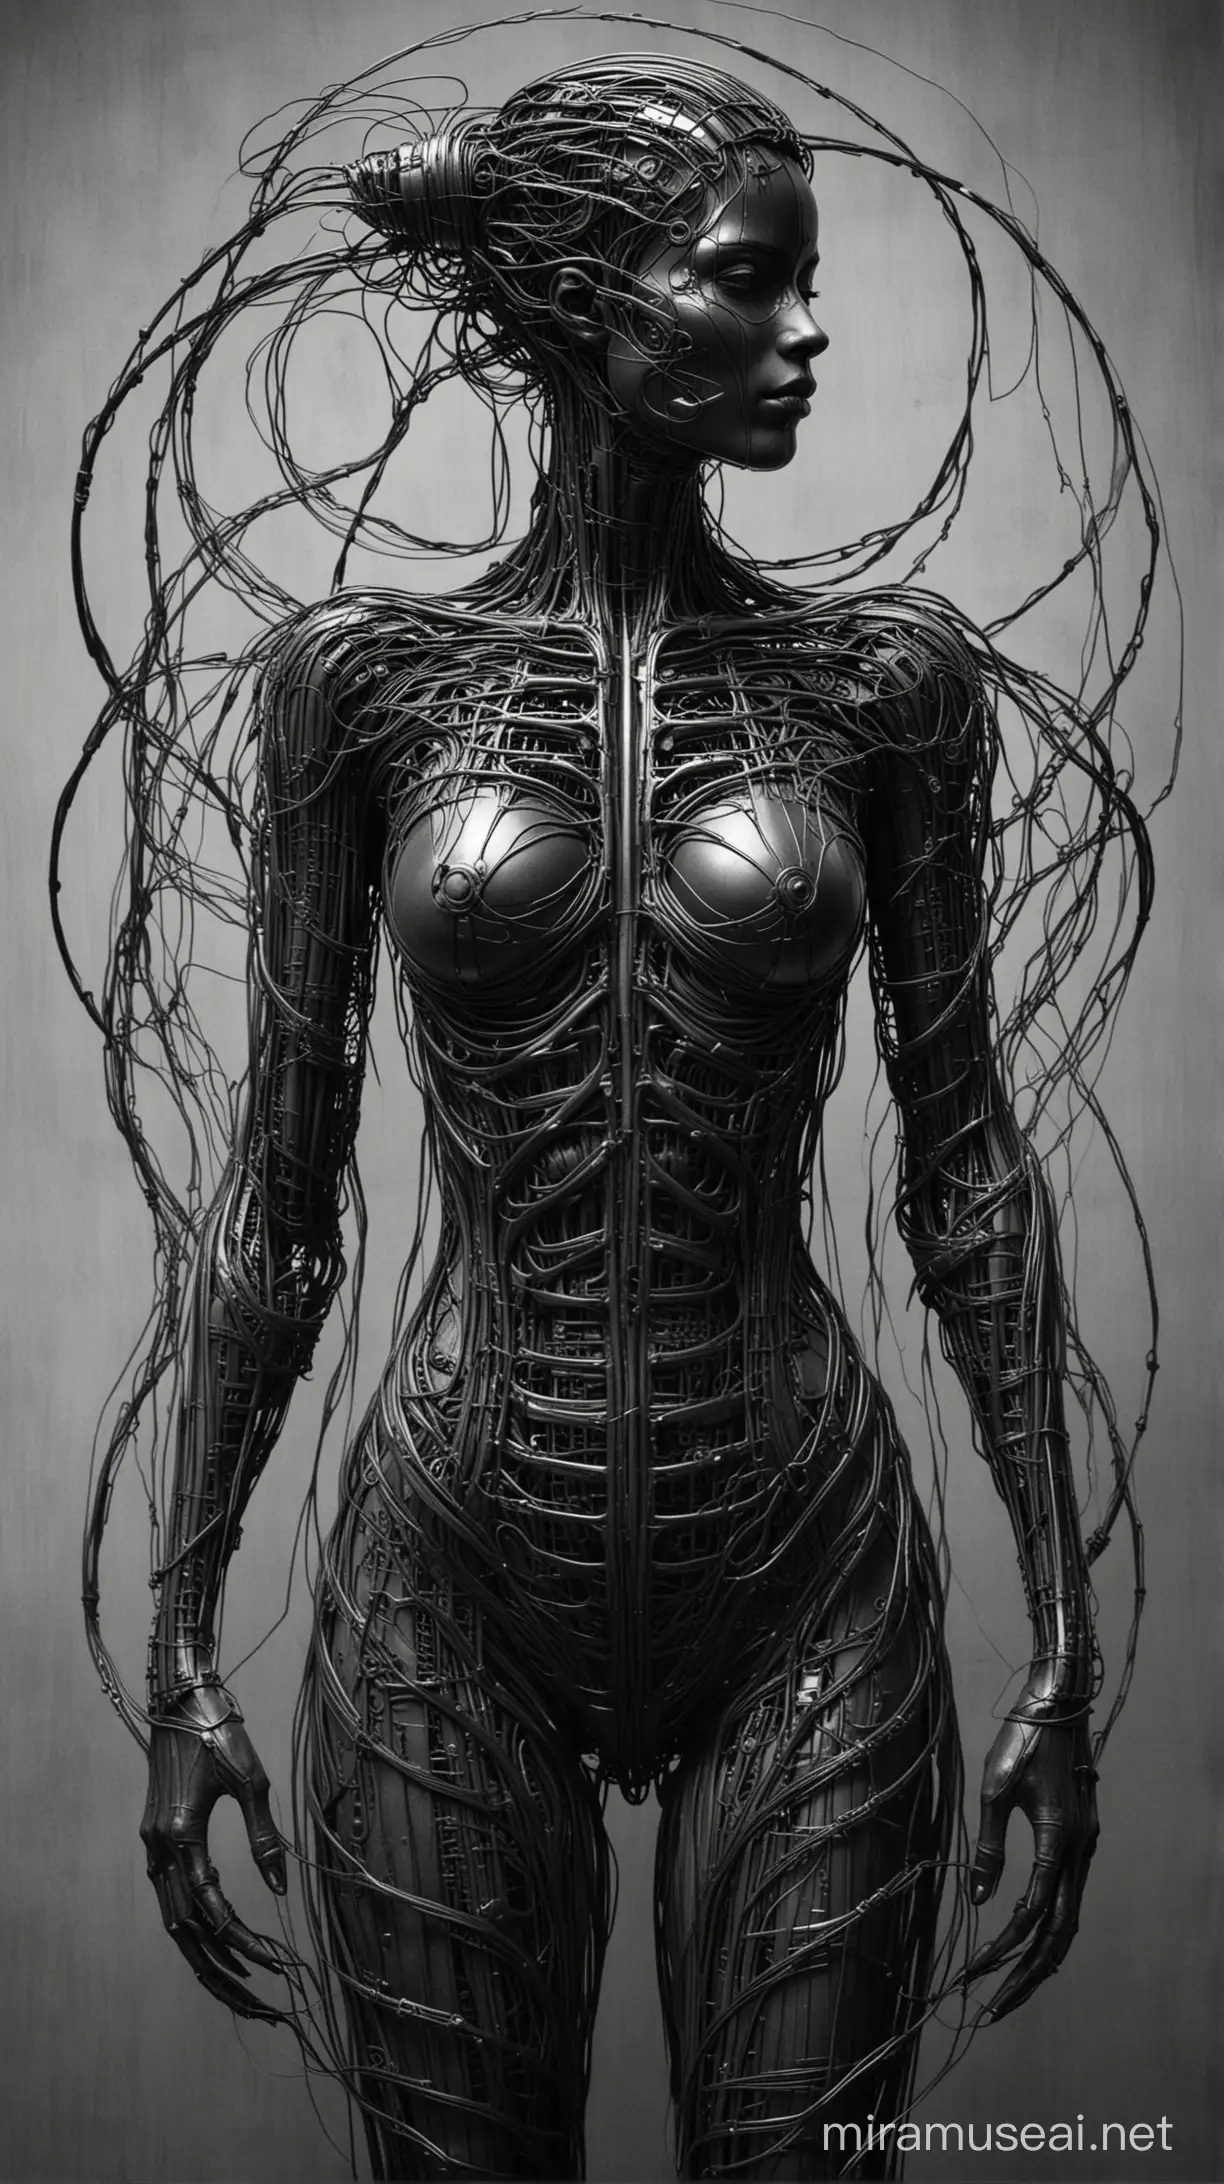 silhouette of woman created from an intertwined wires in giger style